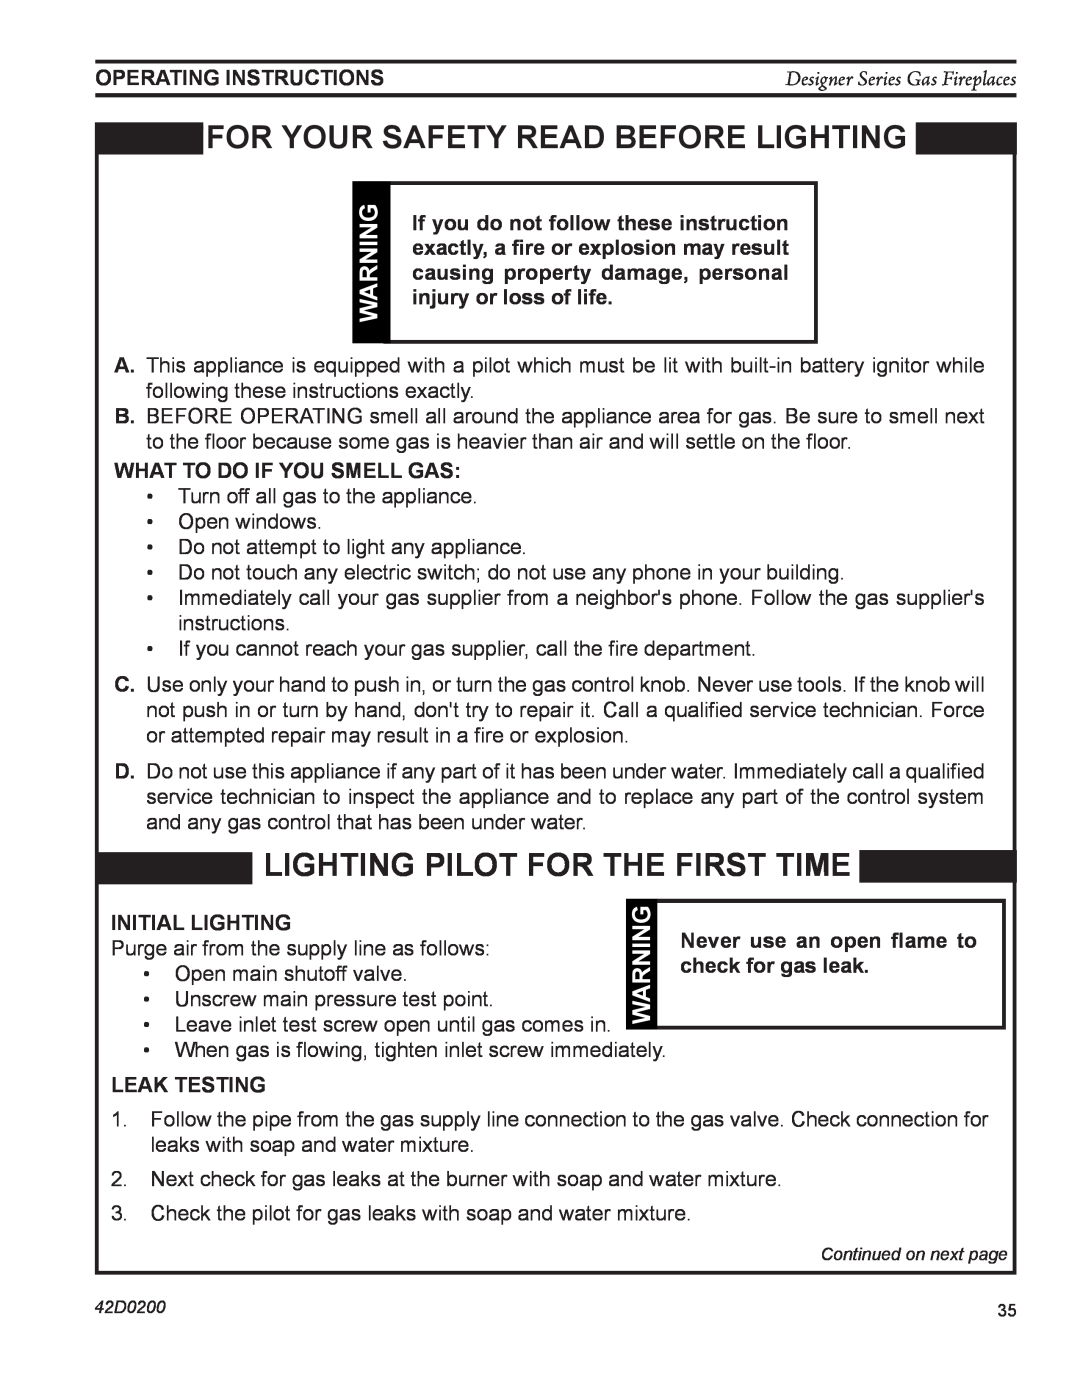 Monessen Hearth 624DV(ST for your safety read before lighting, Lighting pilot for the first time, Operating Instructions 